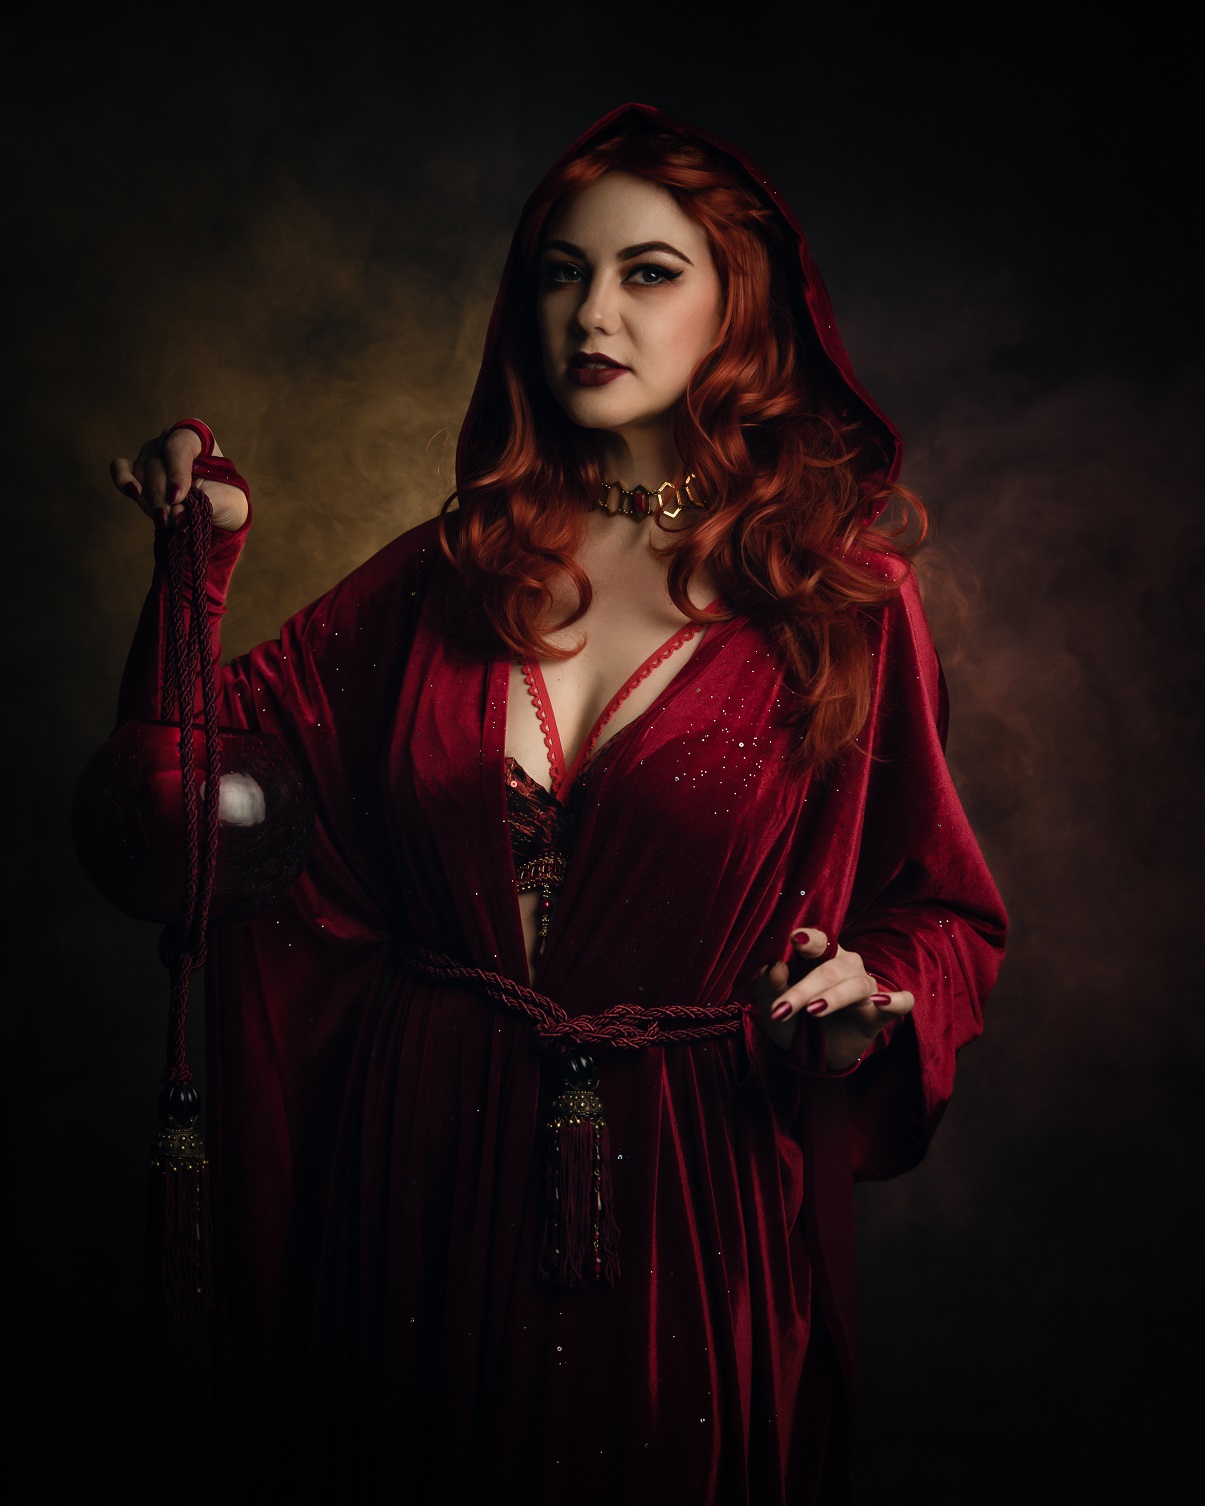 Ginger Ale as Melisandre (The Red Woman) from Game of Thrones